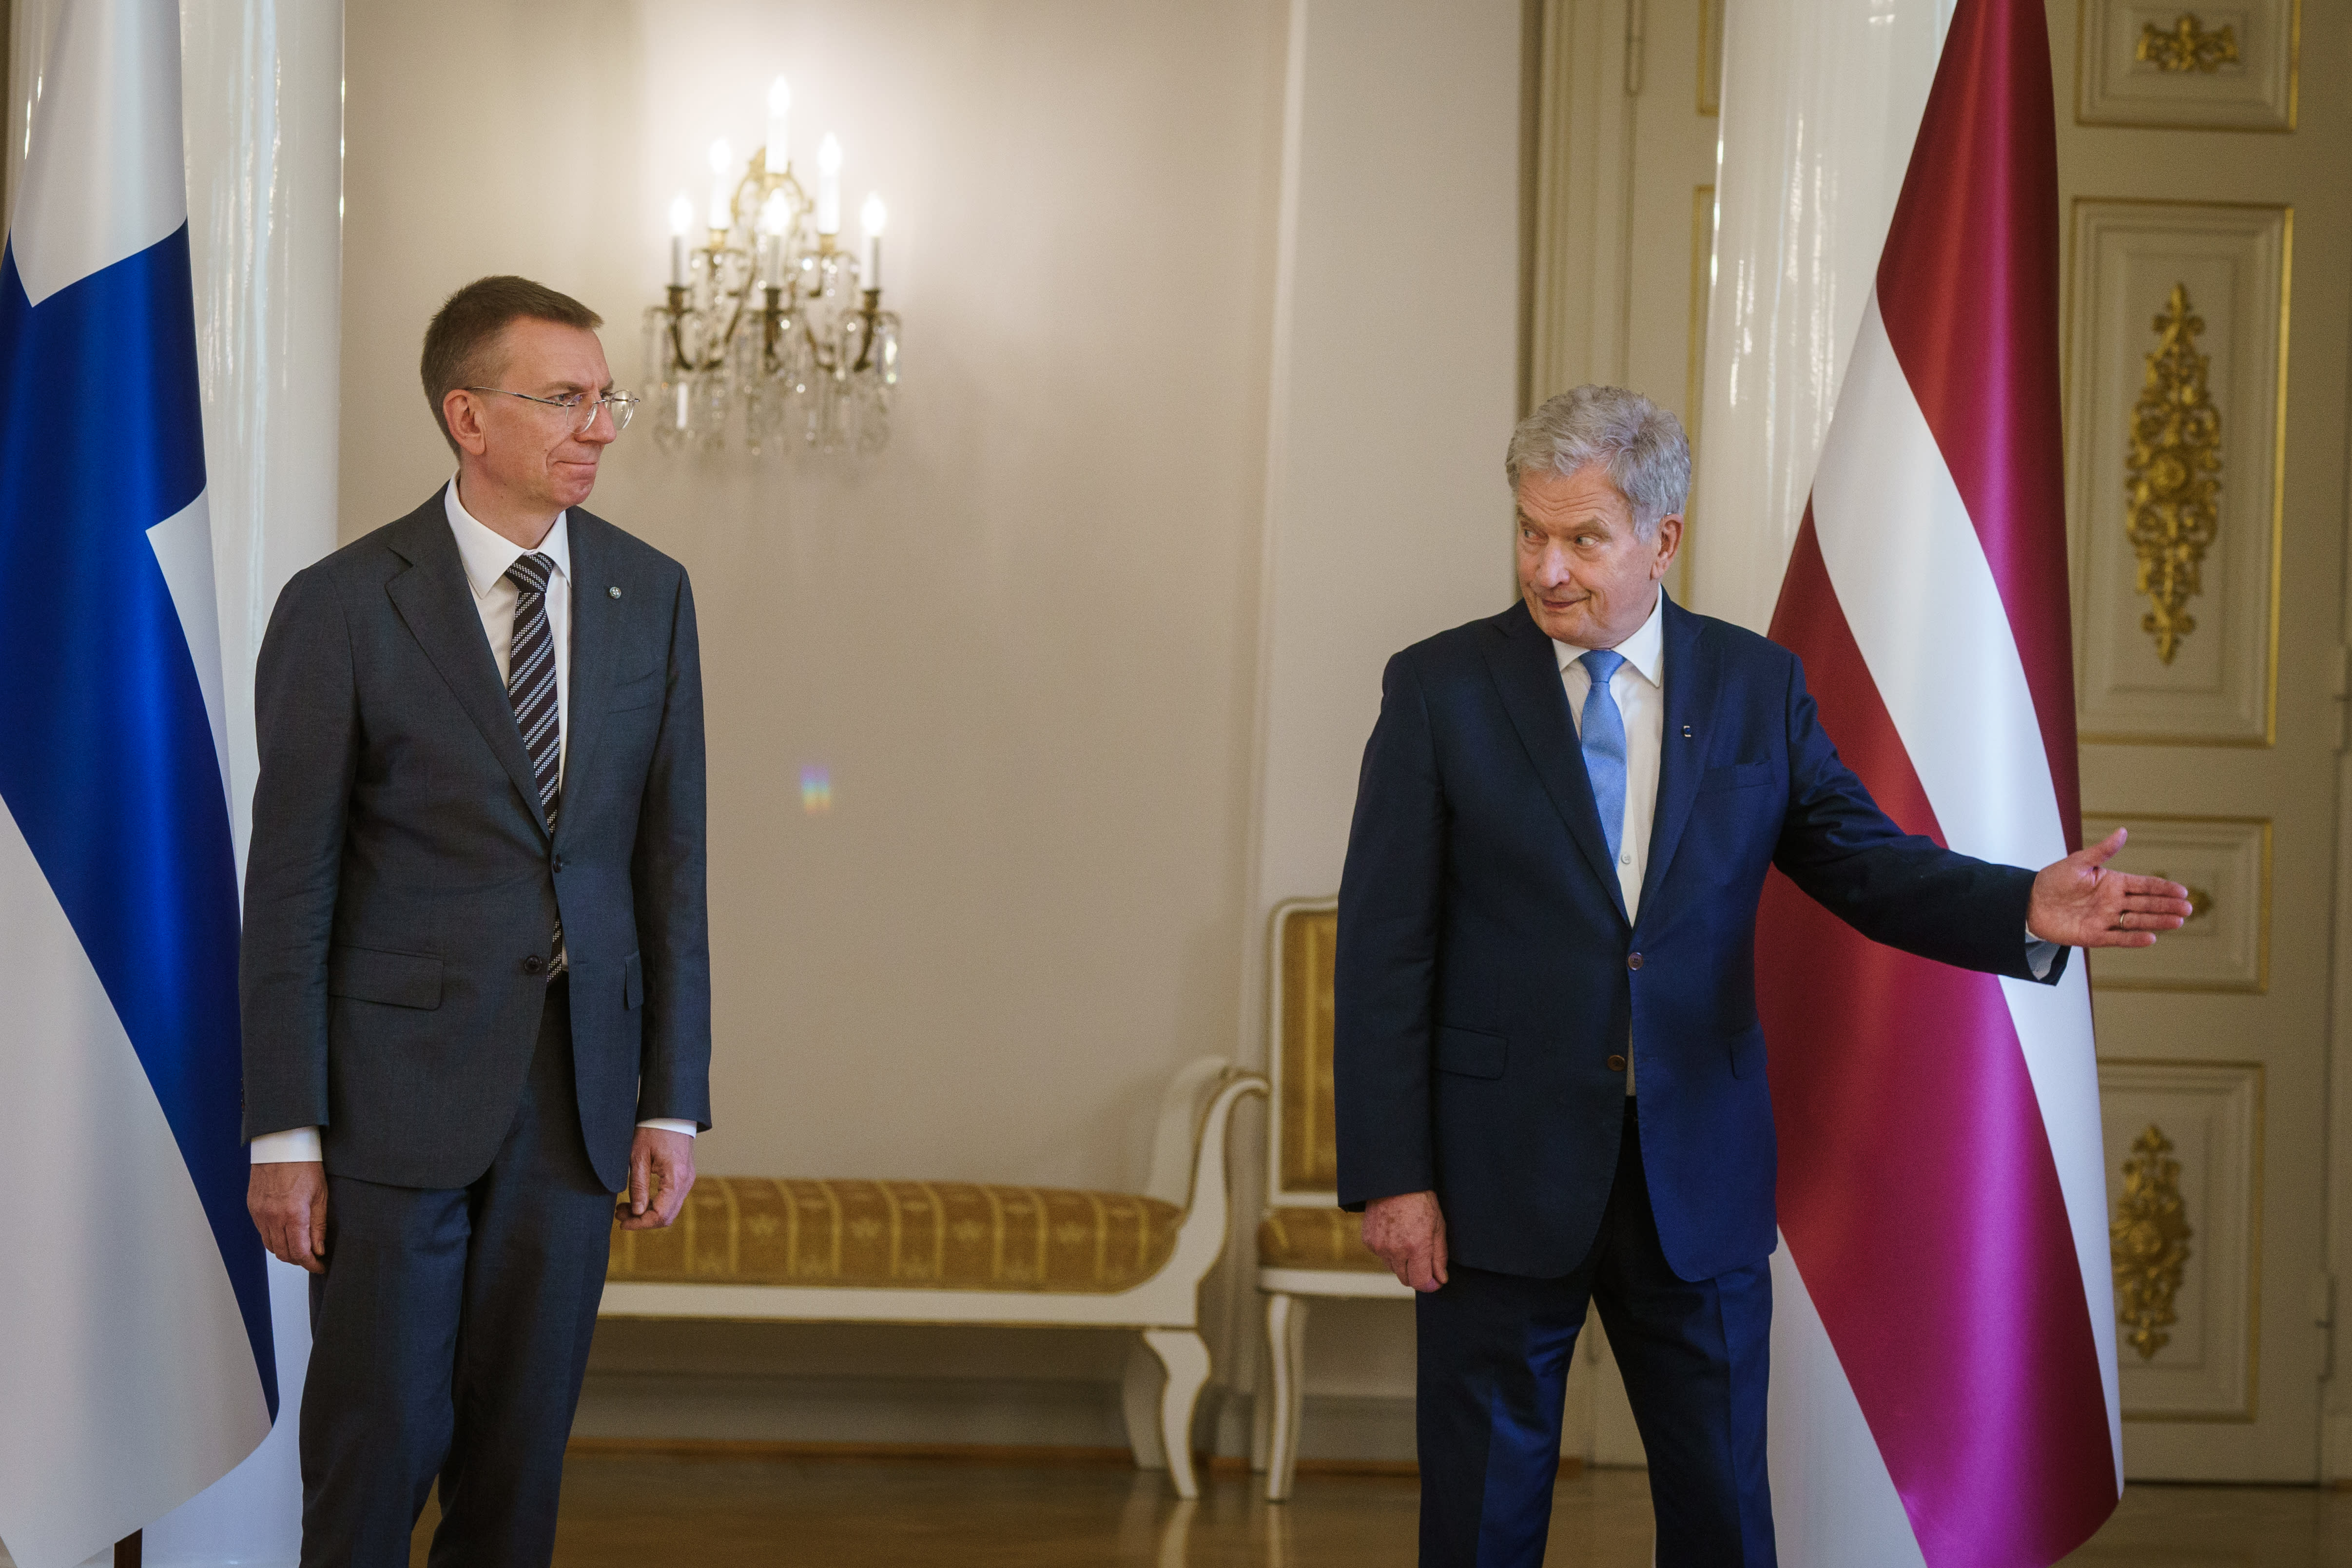 The Finnish president and foreign minister will meet their Latvian and French counterparts